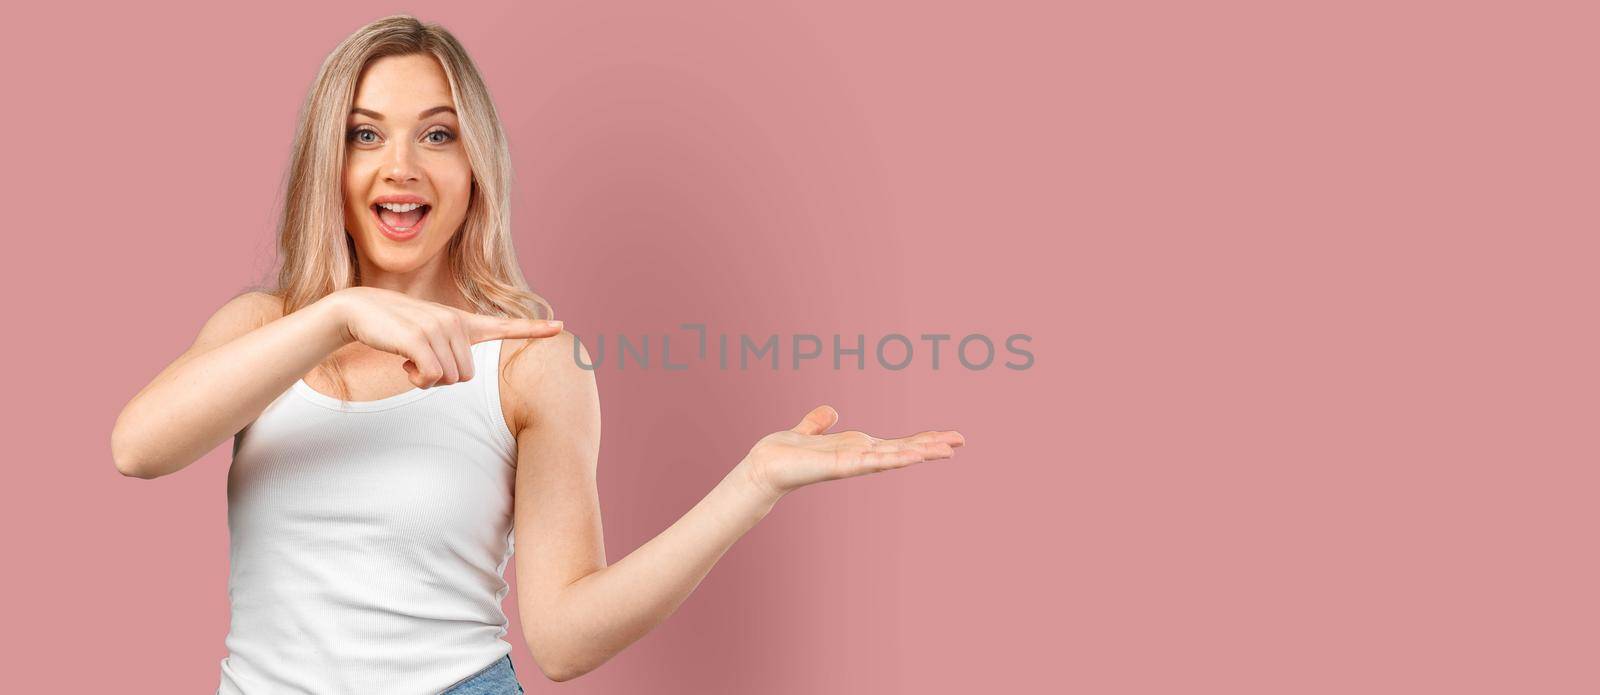 Young smiling woman pointing to copy space isolated on color background by Fabrikasimf